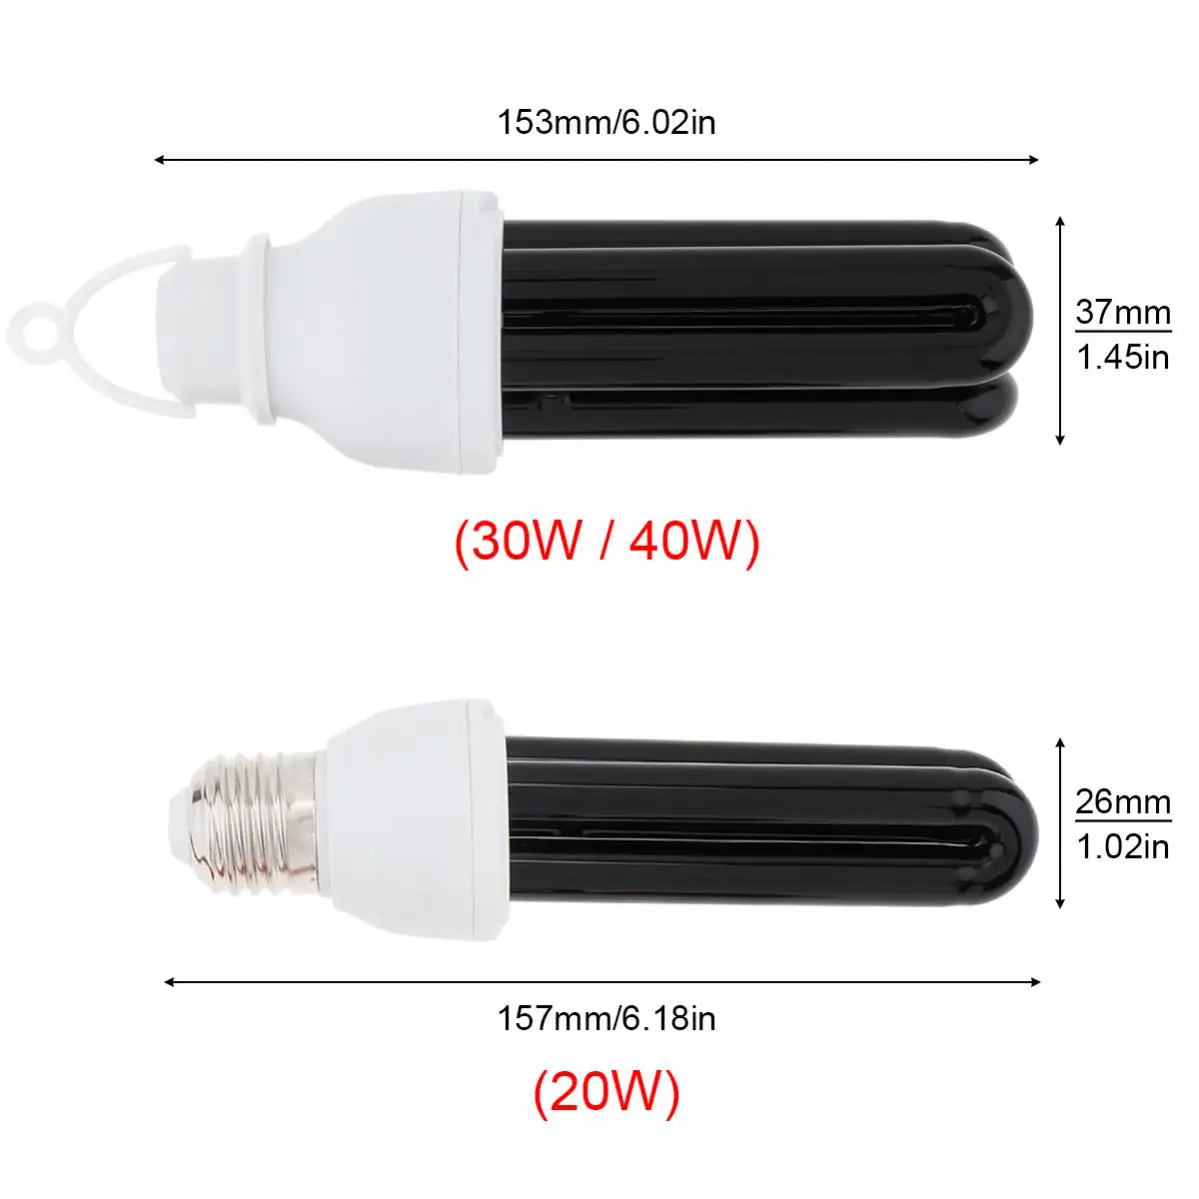 20/30/40W UV Black Light Attracting Insects Lamp CFL Farming Lights 365NM 12V Ultraviolet Lamp Trap Light